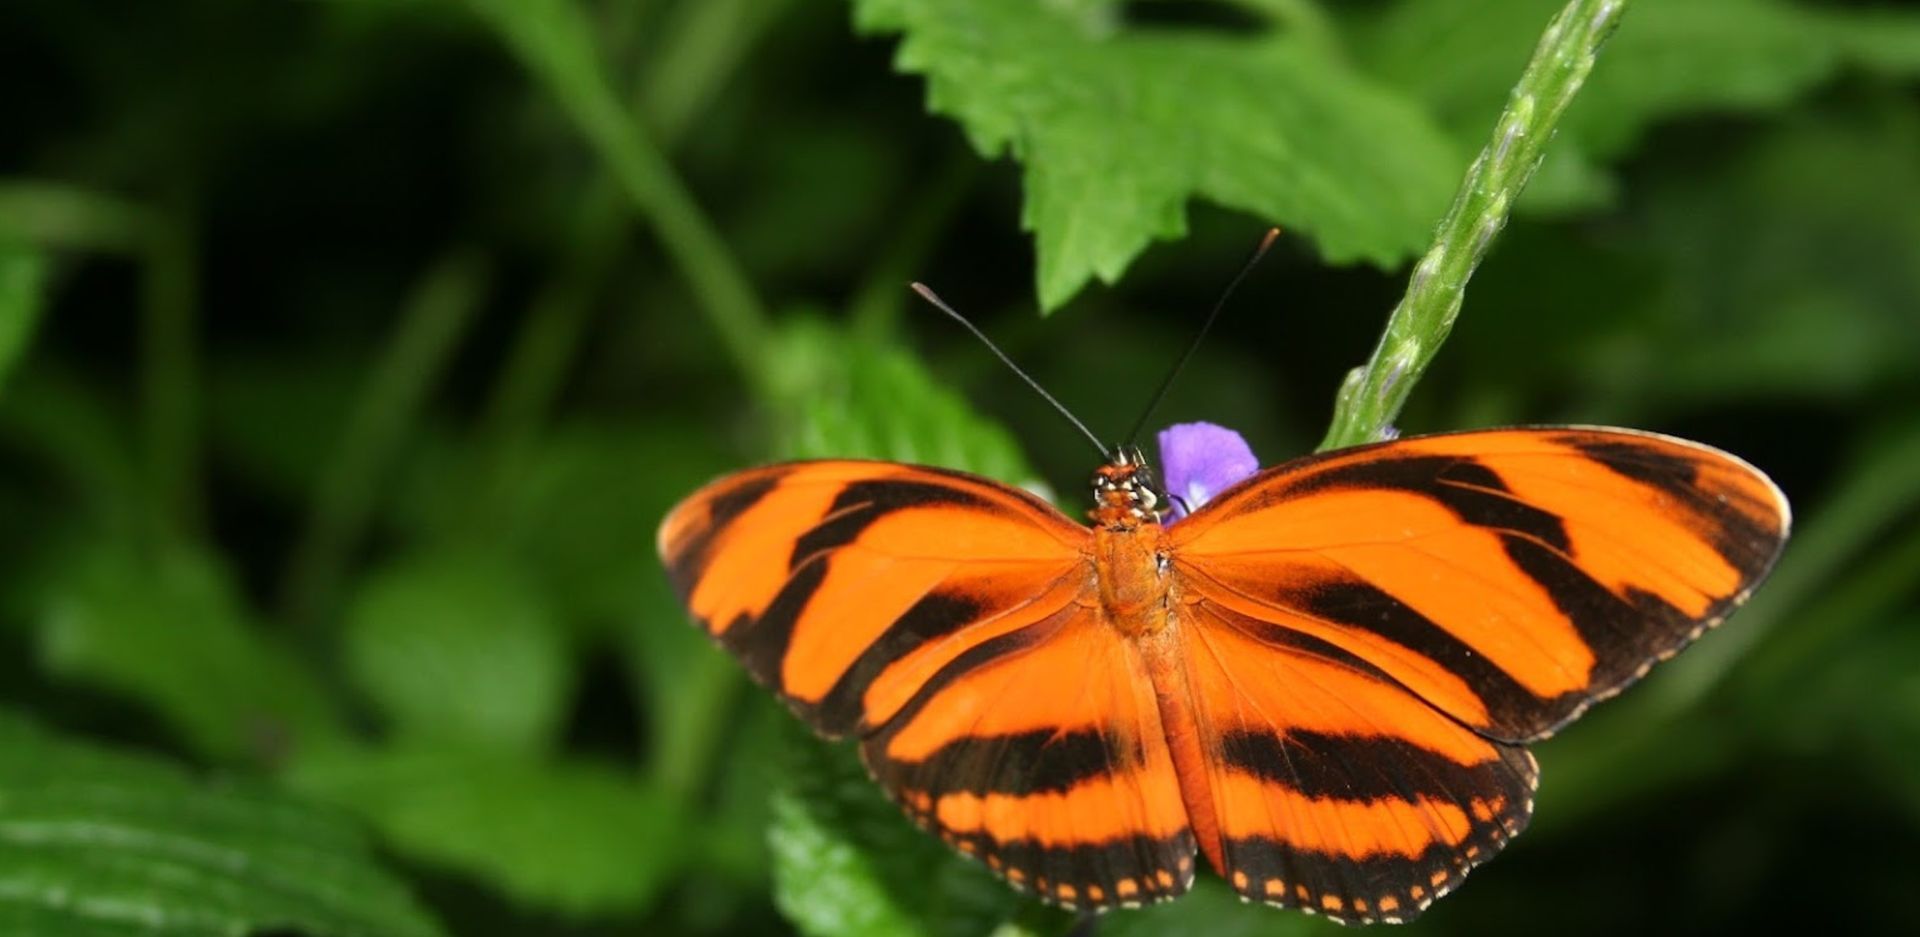 Niagara's Butterfly Conservatory